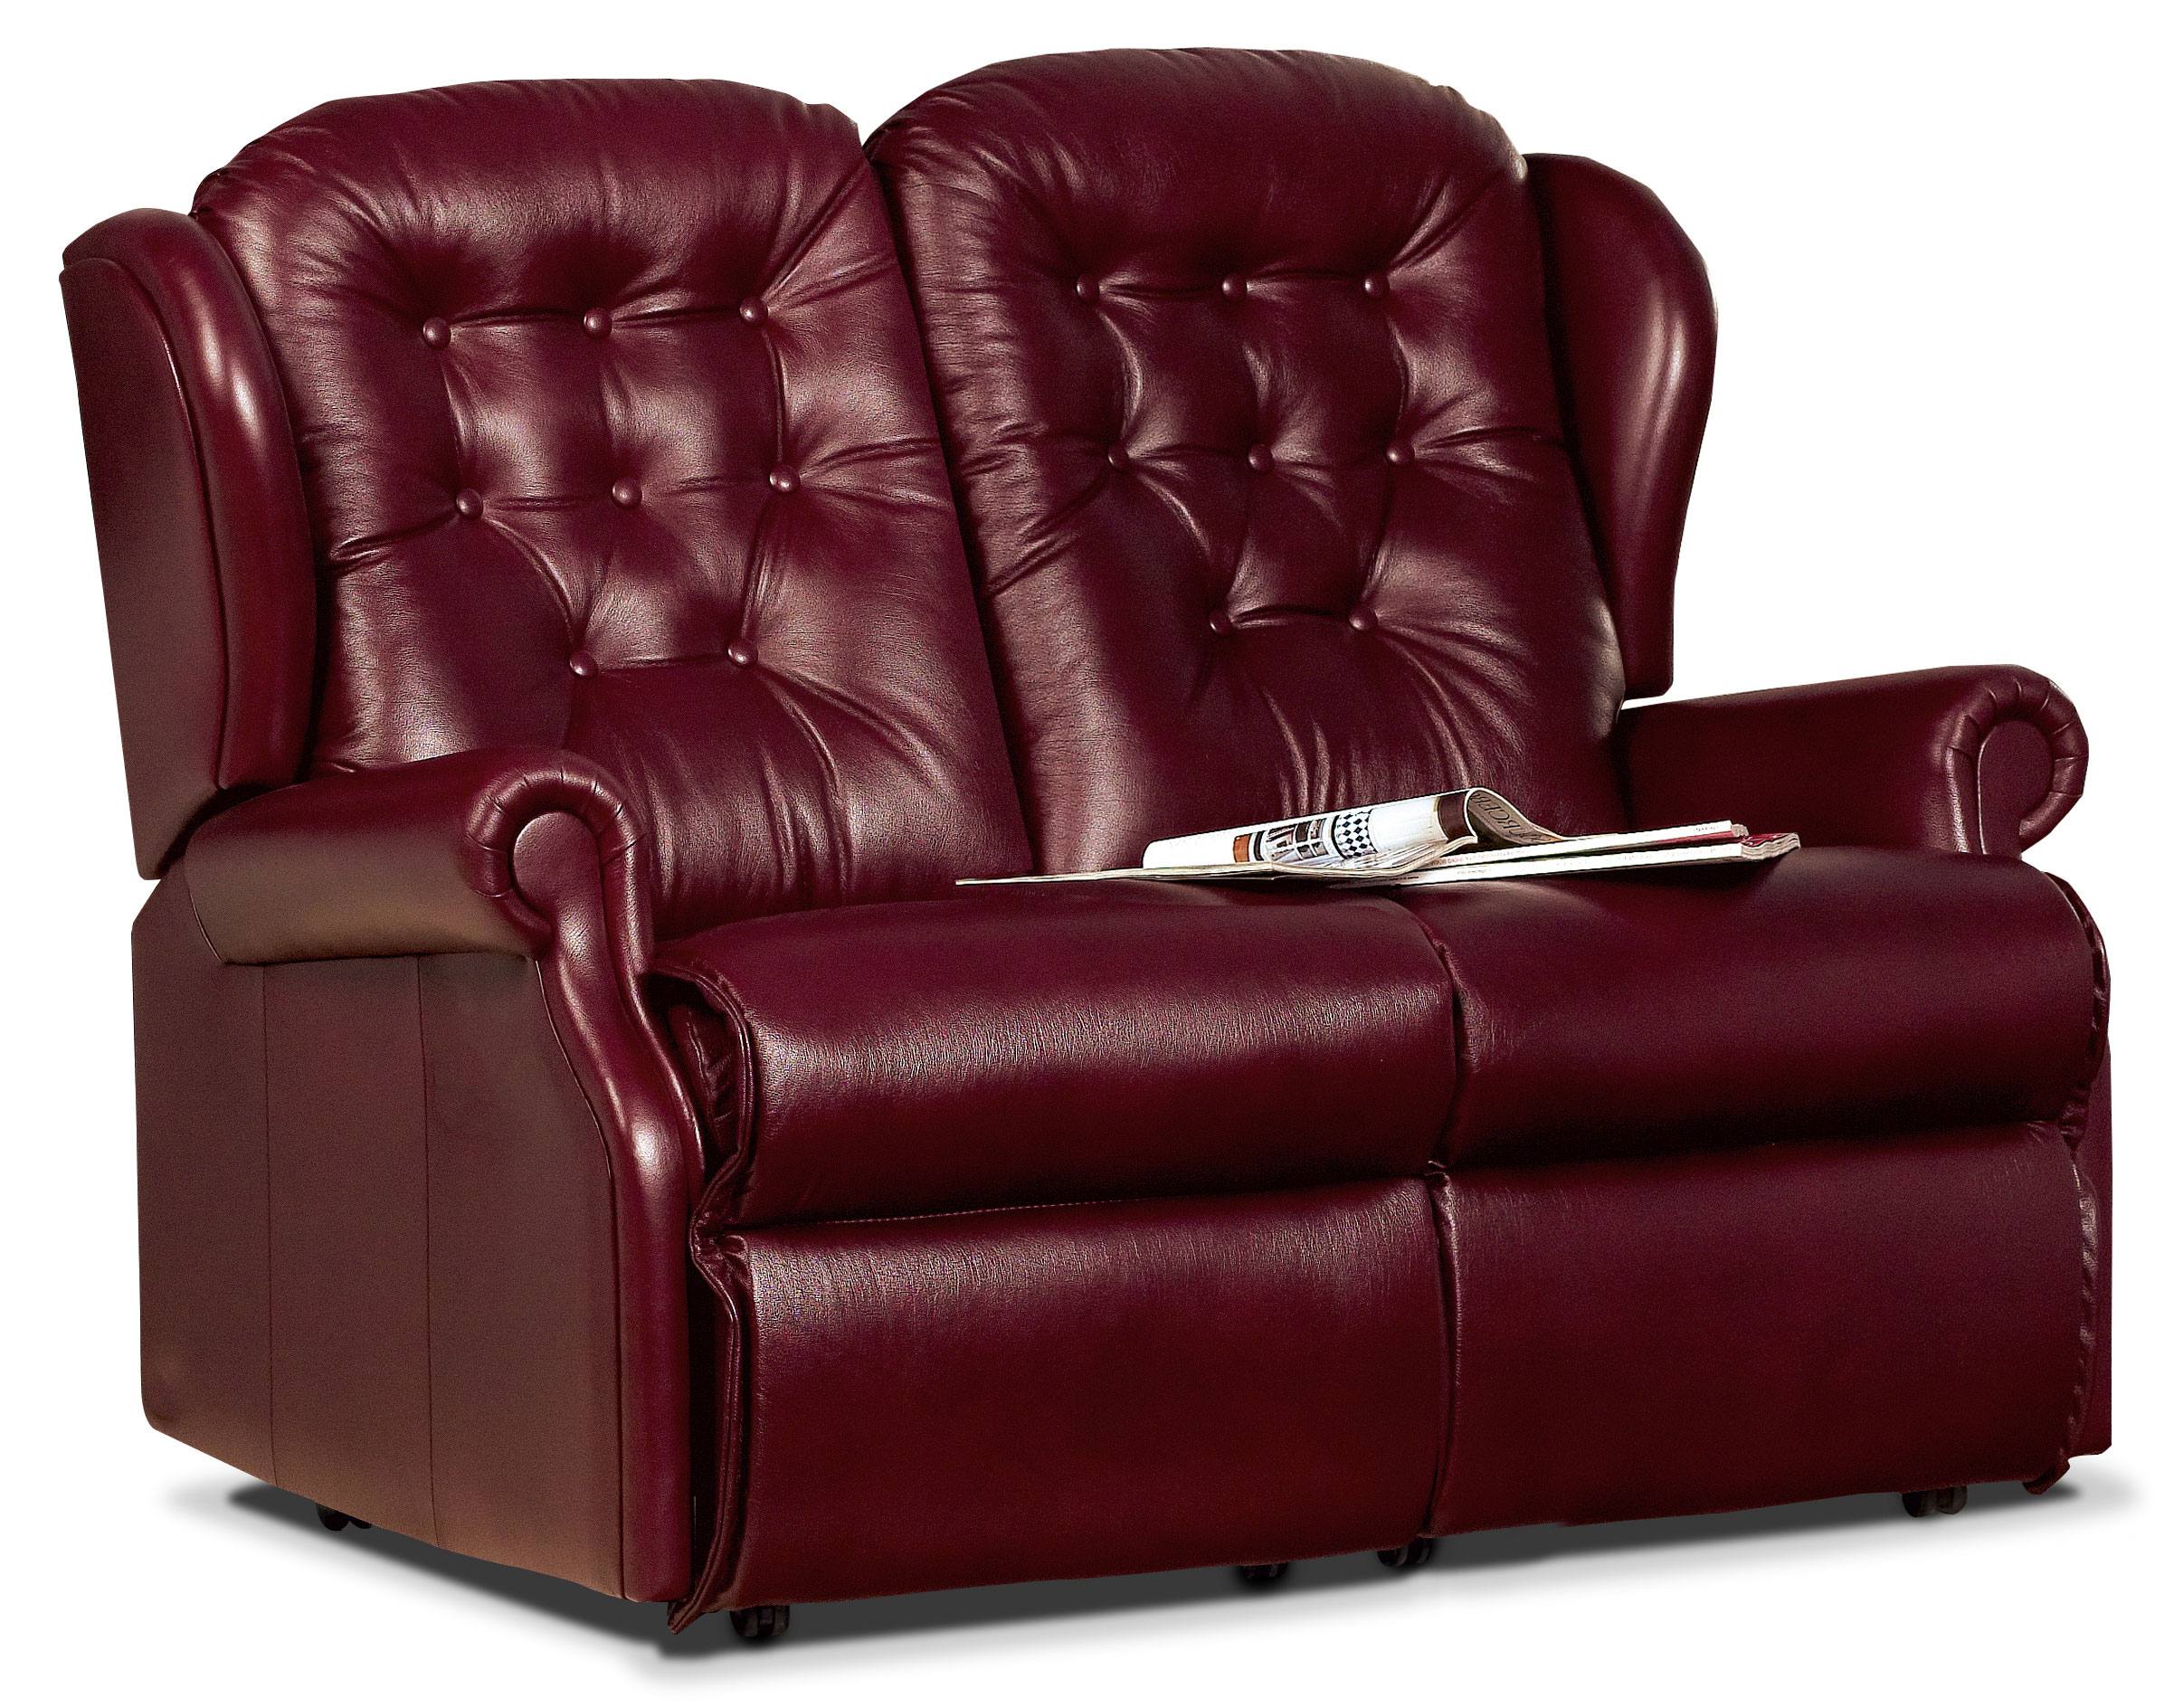 2 seater leather sofa beds uk